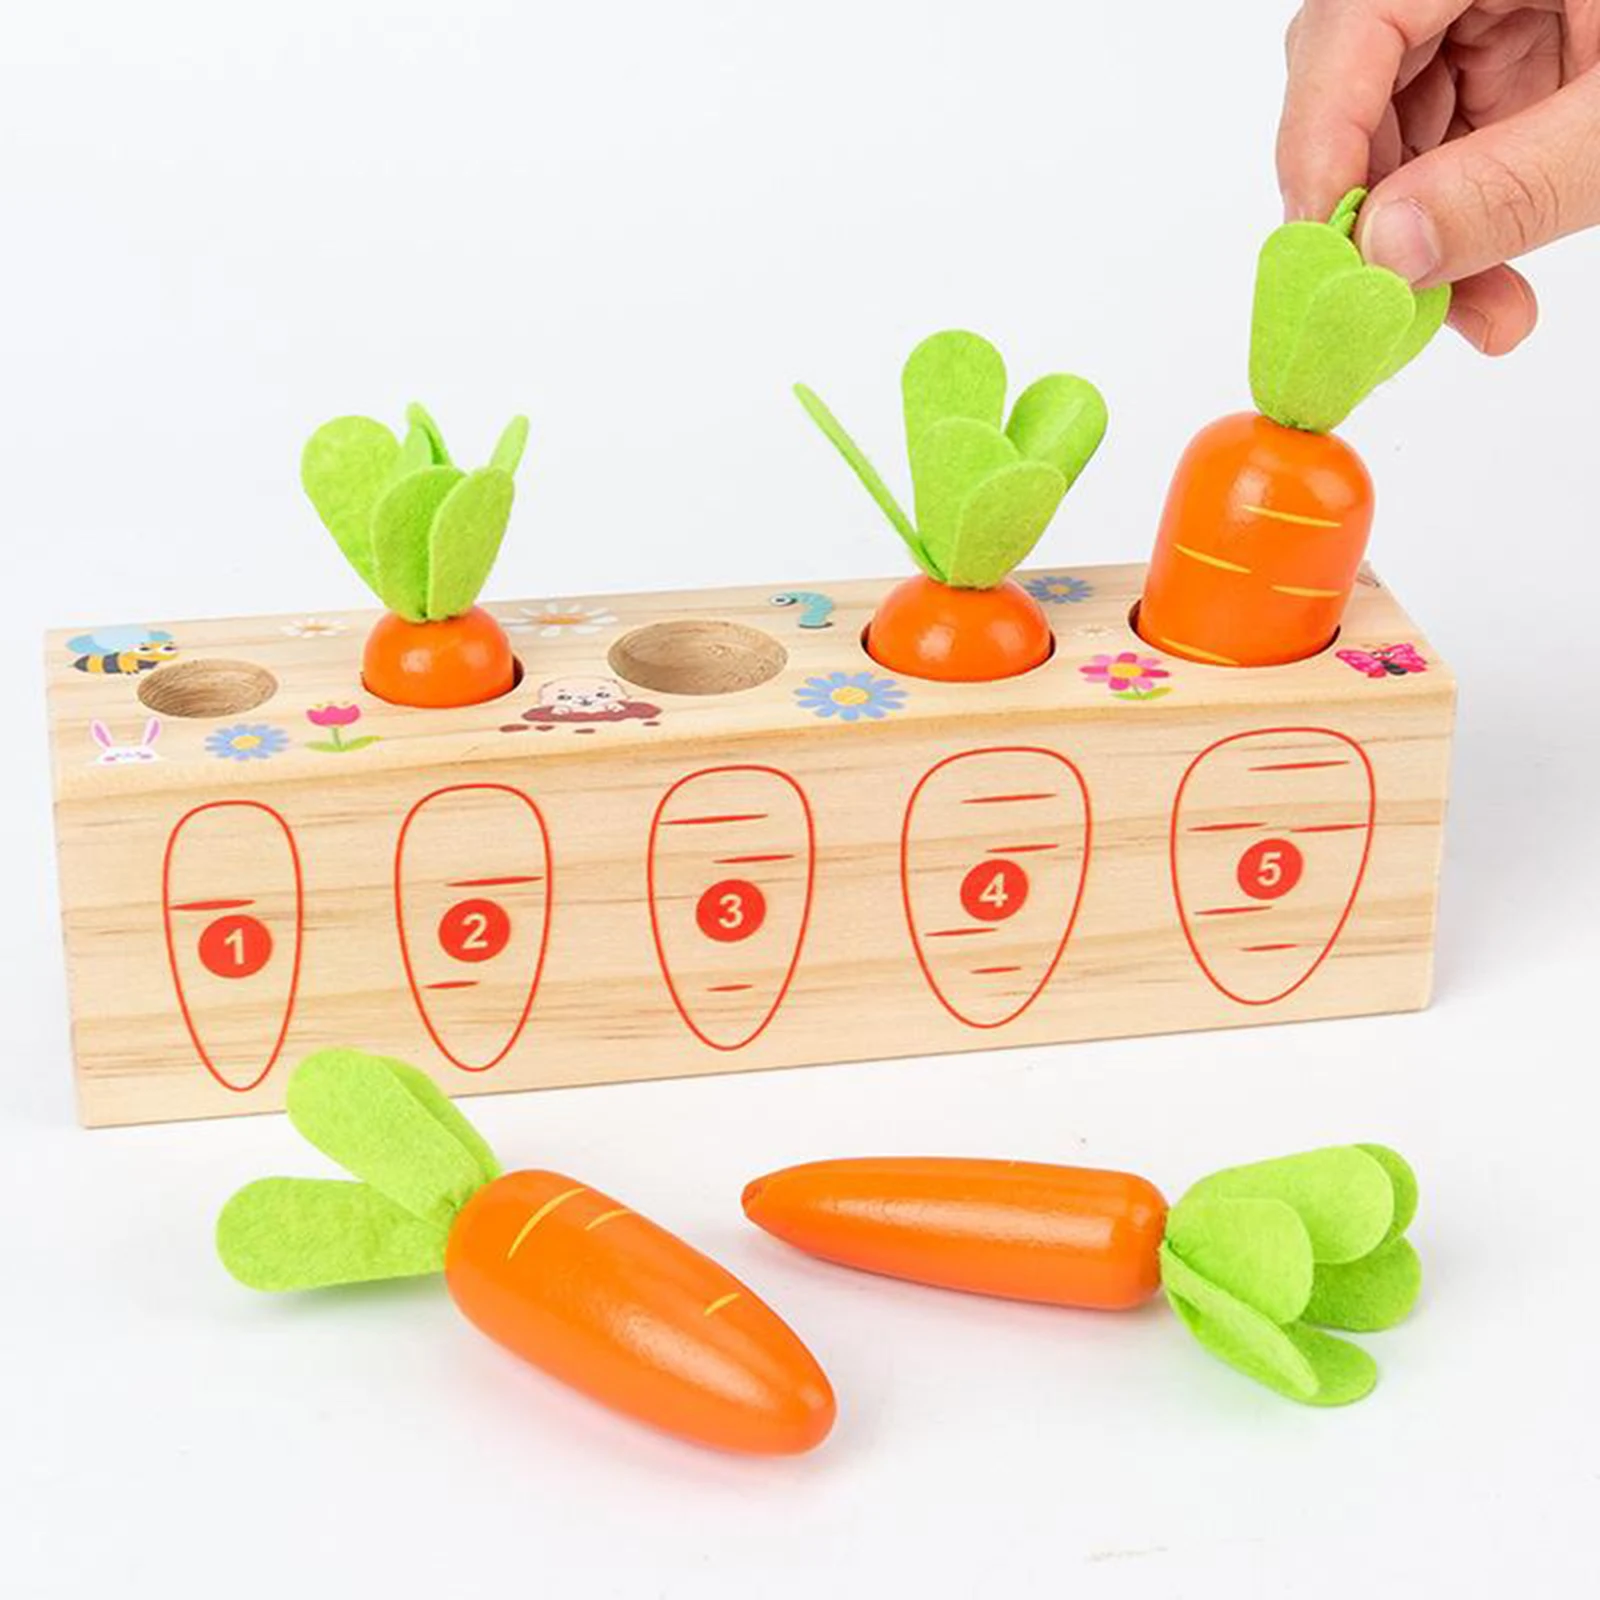 Carrots Harvest Toys Wooden Shape Size Memory Matching Puzzle Developmental Games Sorting Games for Toddlers Educational Toys